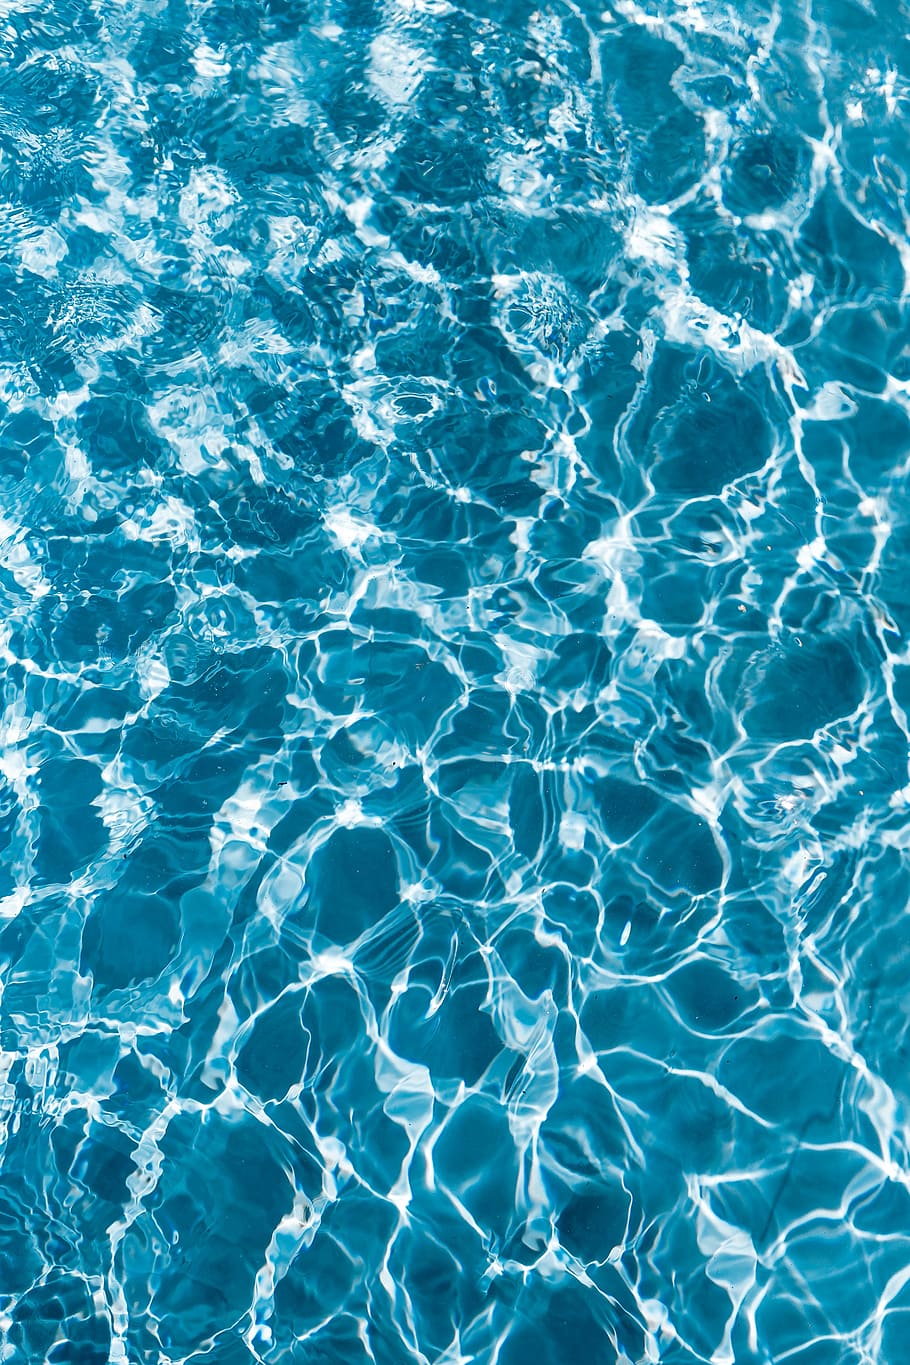 wavy, water surface, swimming, pool, water, wave, abstract, background, sunny, reflection